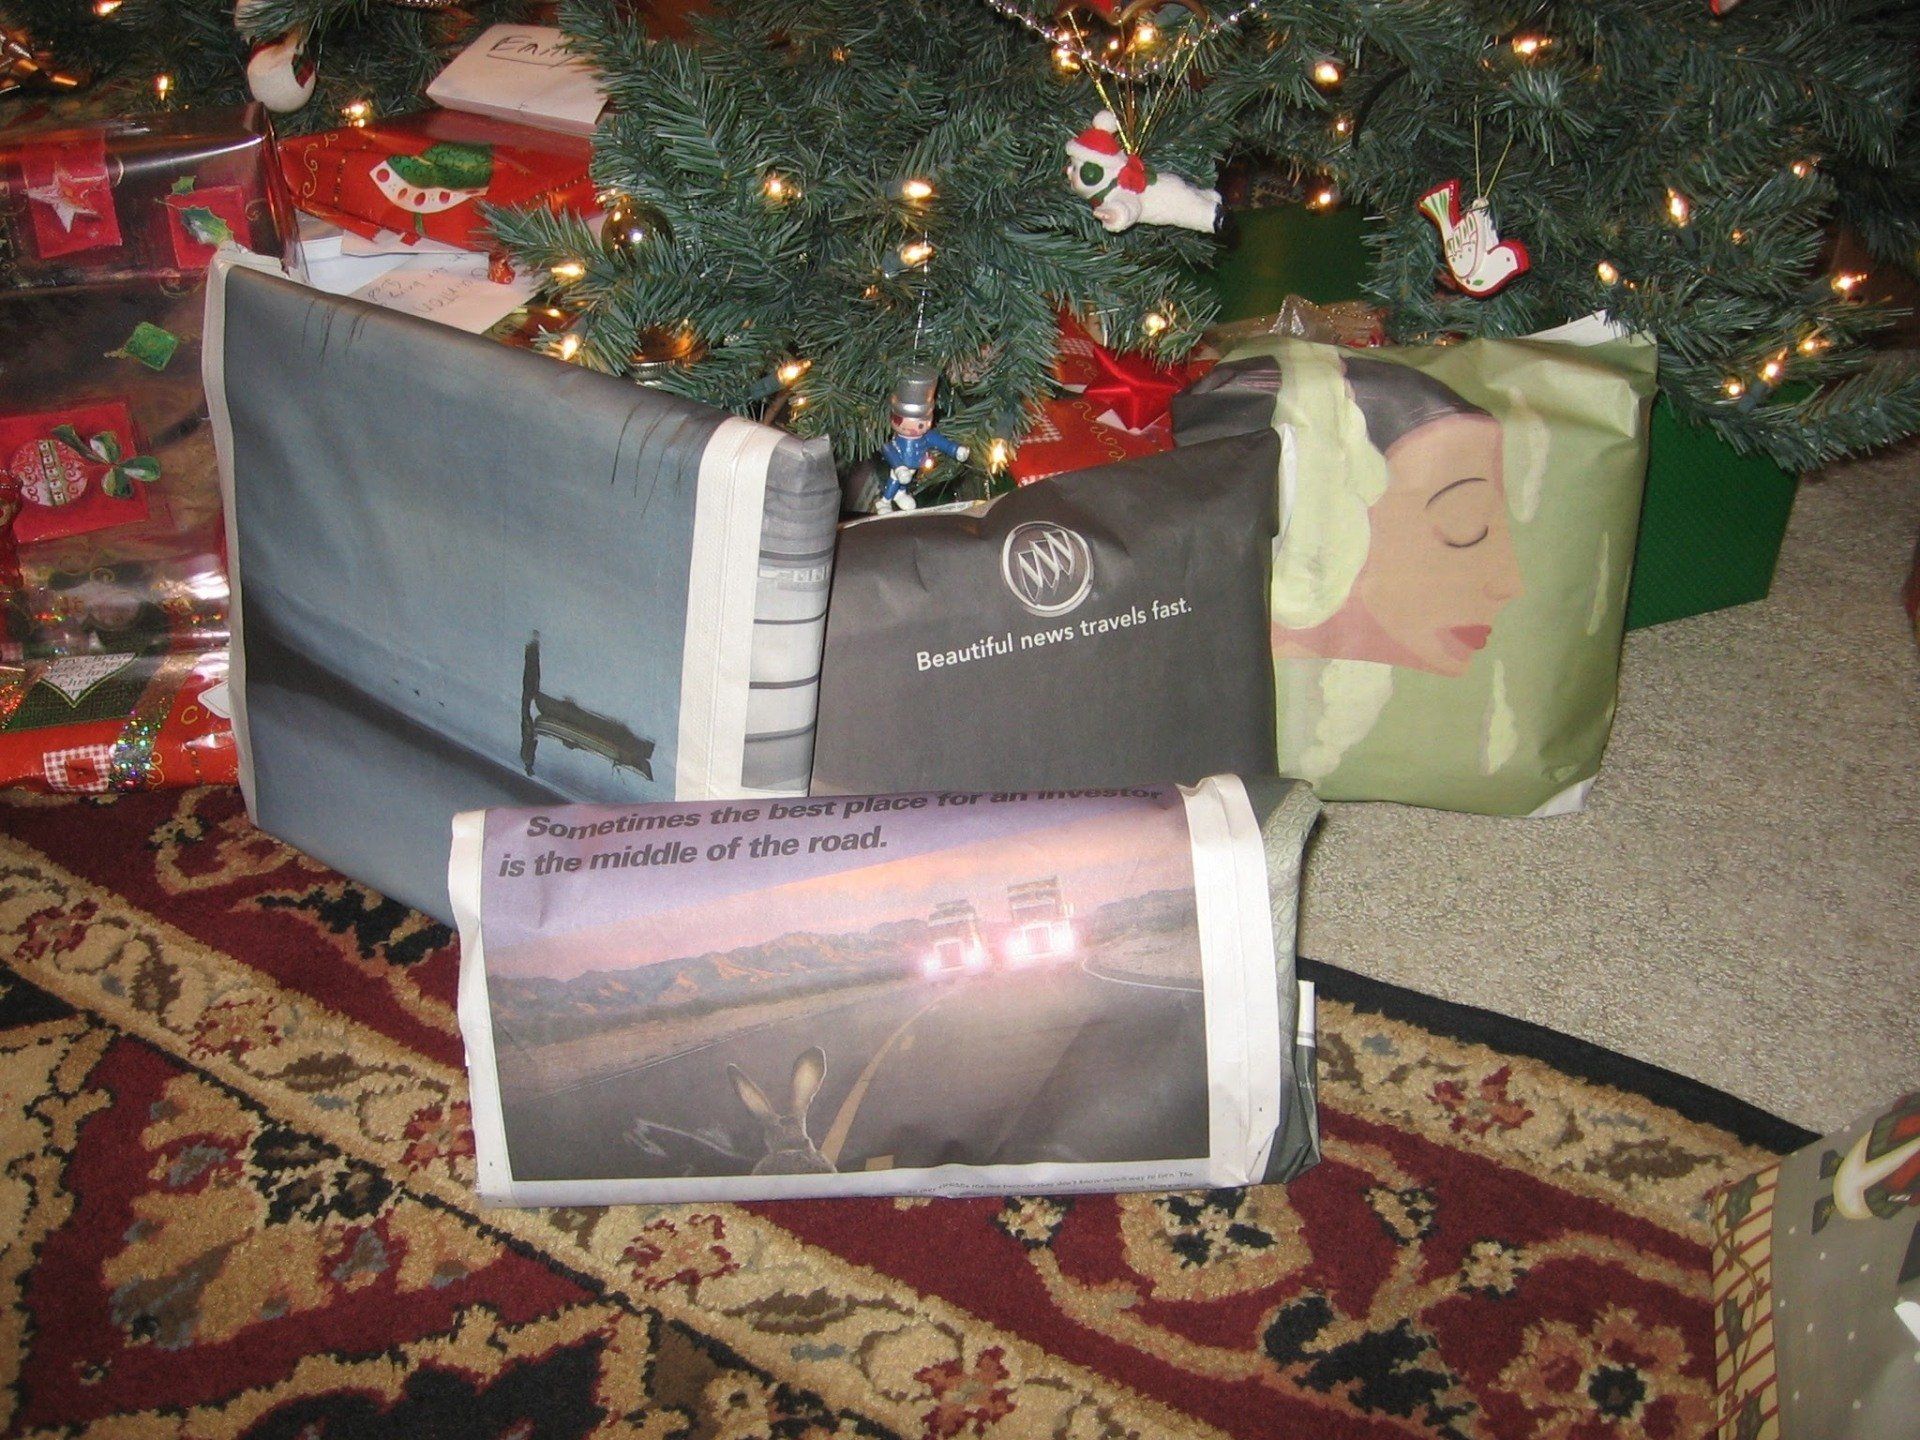 Image of presents under a Christmas tree